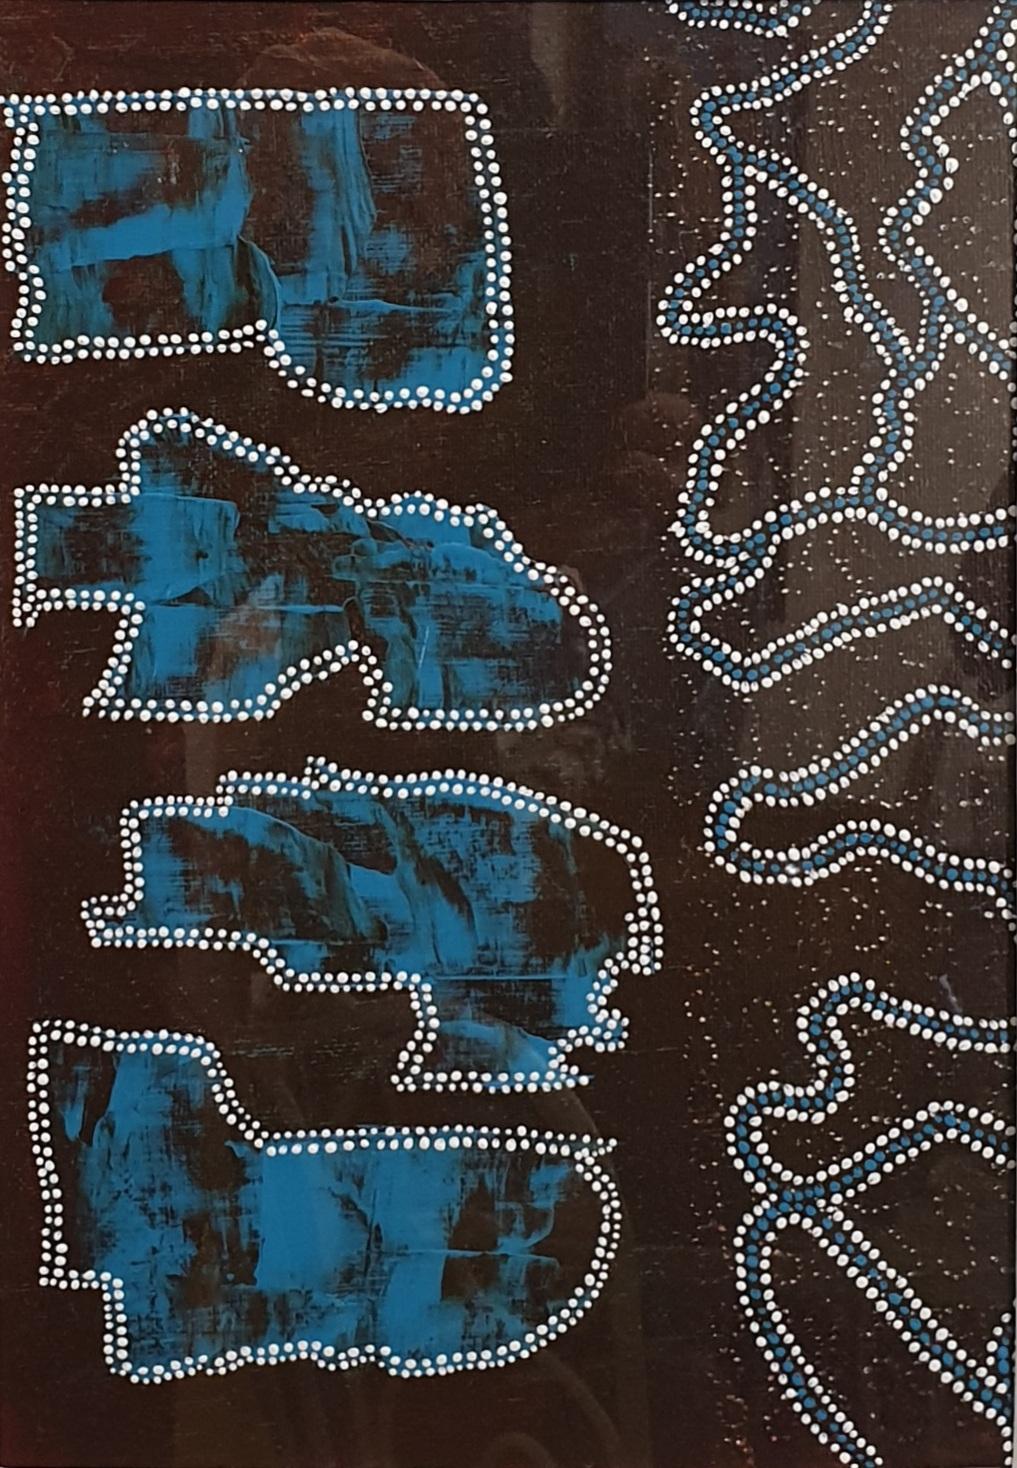 Contemporary Aboriginal Inspired Abstract. - Painting by Menno Modderman